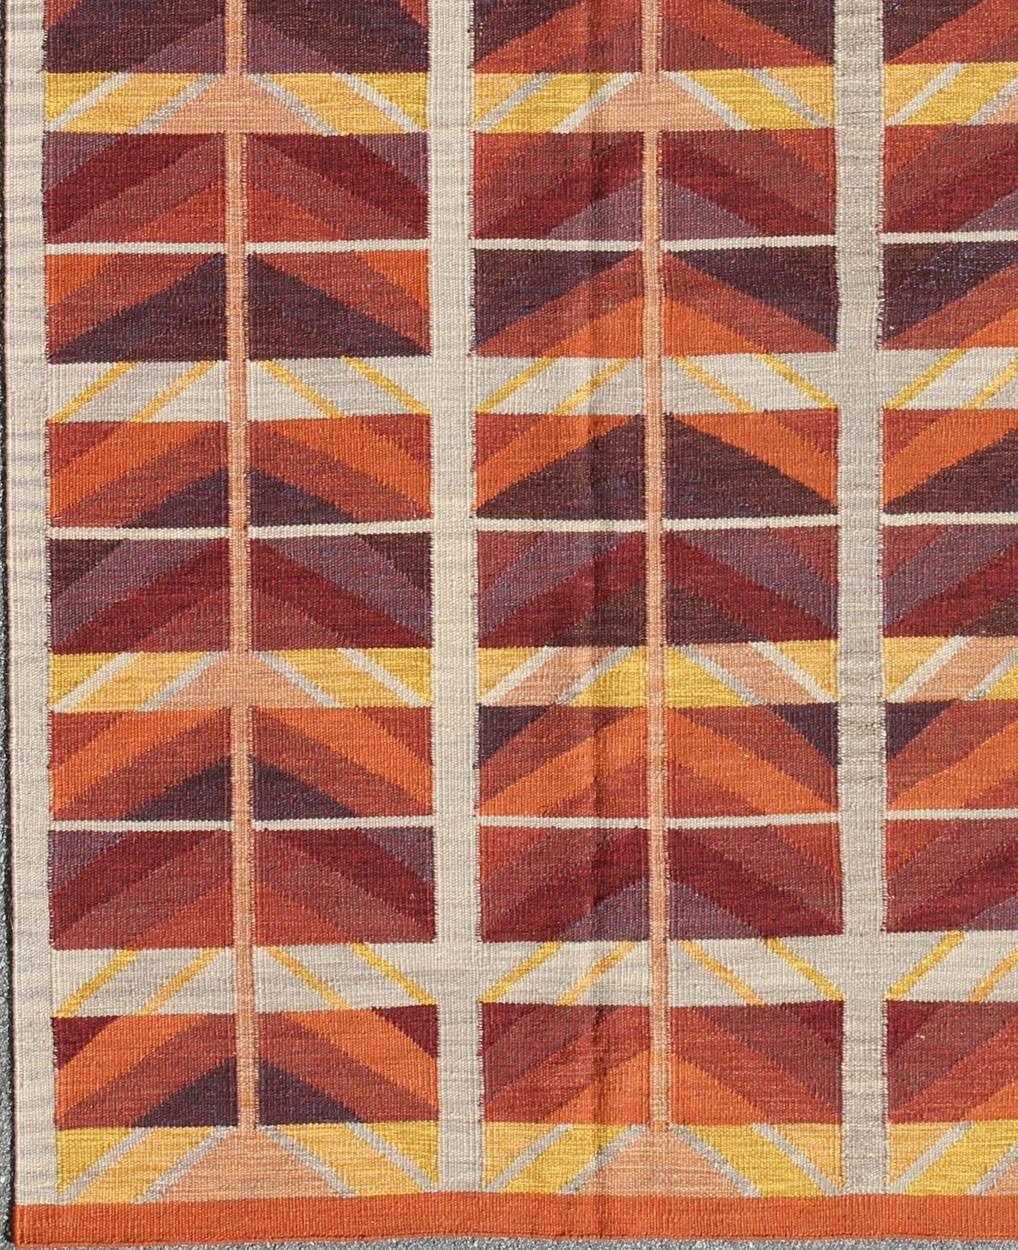 Large Modern Swedish Design Rug with Architectural and Geometric Pattern.
This Scandinavian flat-weave is inspired by the work of Swedish textile designers of the early to mid-20th Century. With a unique blend of historical and modern design, this